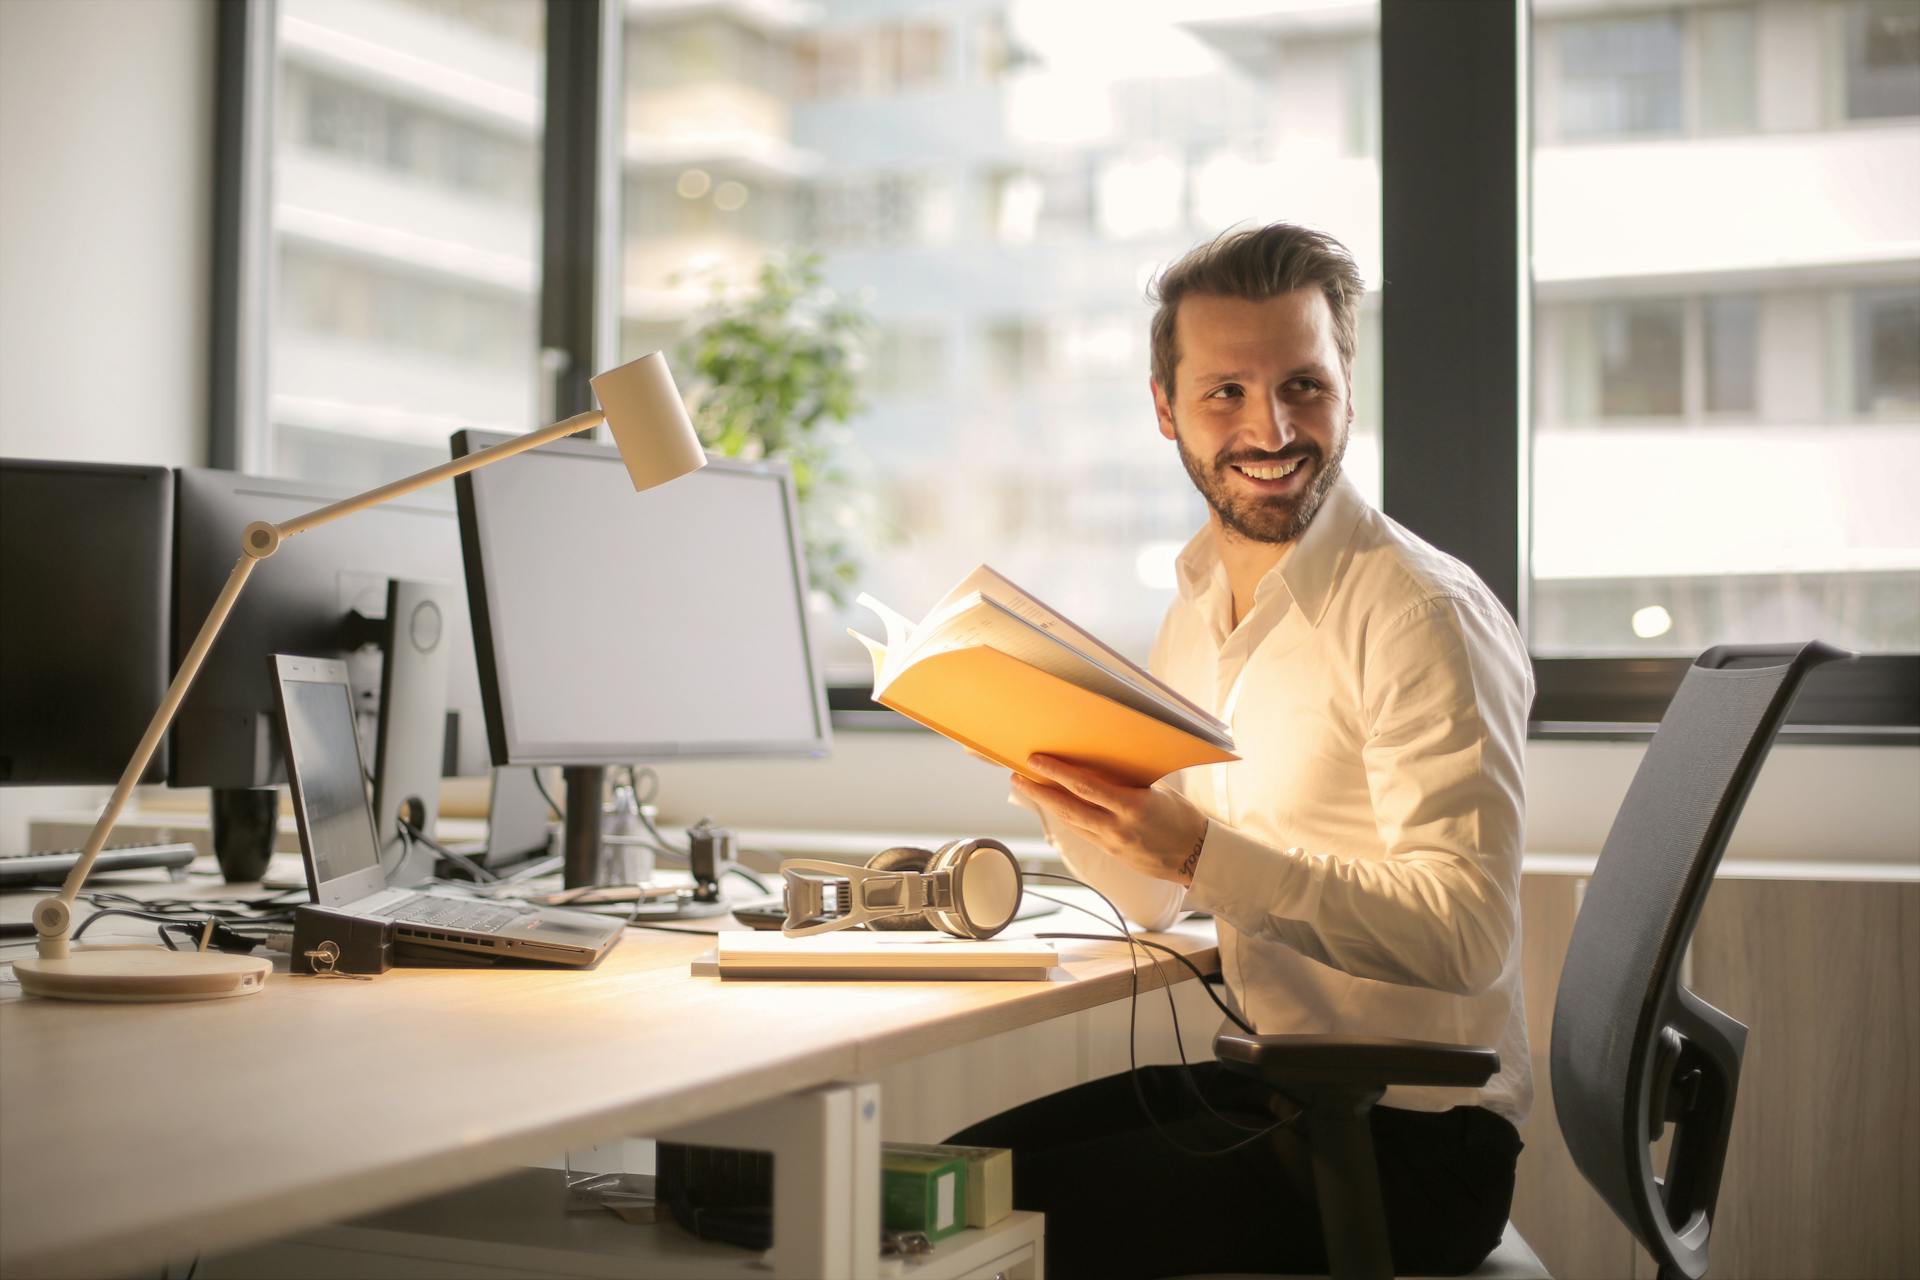 A man holding a book while working in office | Source: Pexels